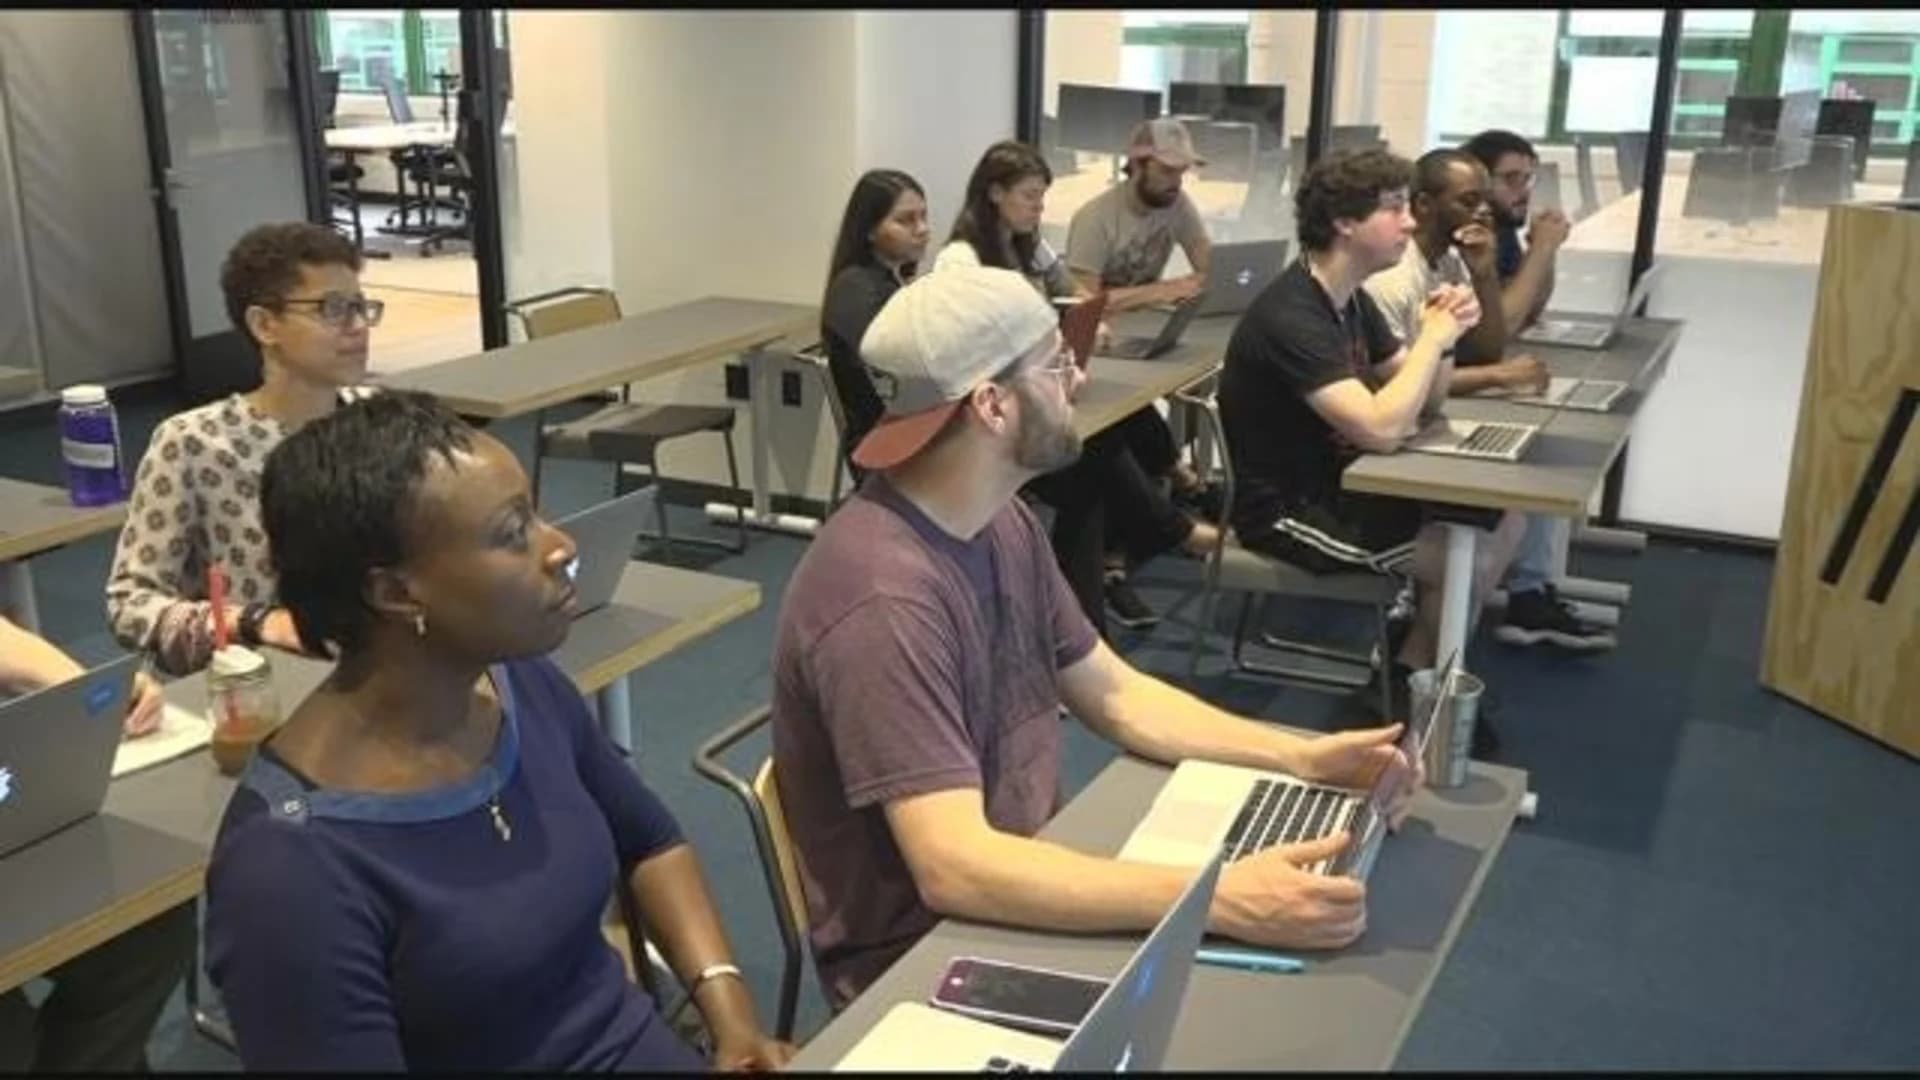 Best of Brooklyn: Low-income residents learn to code in Brooklyn